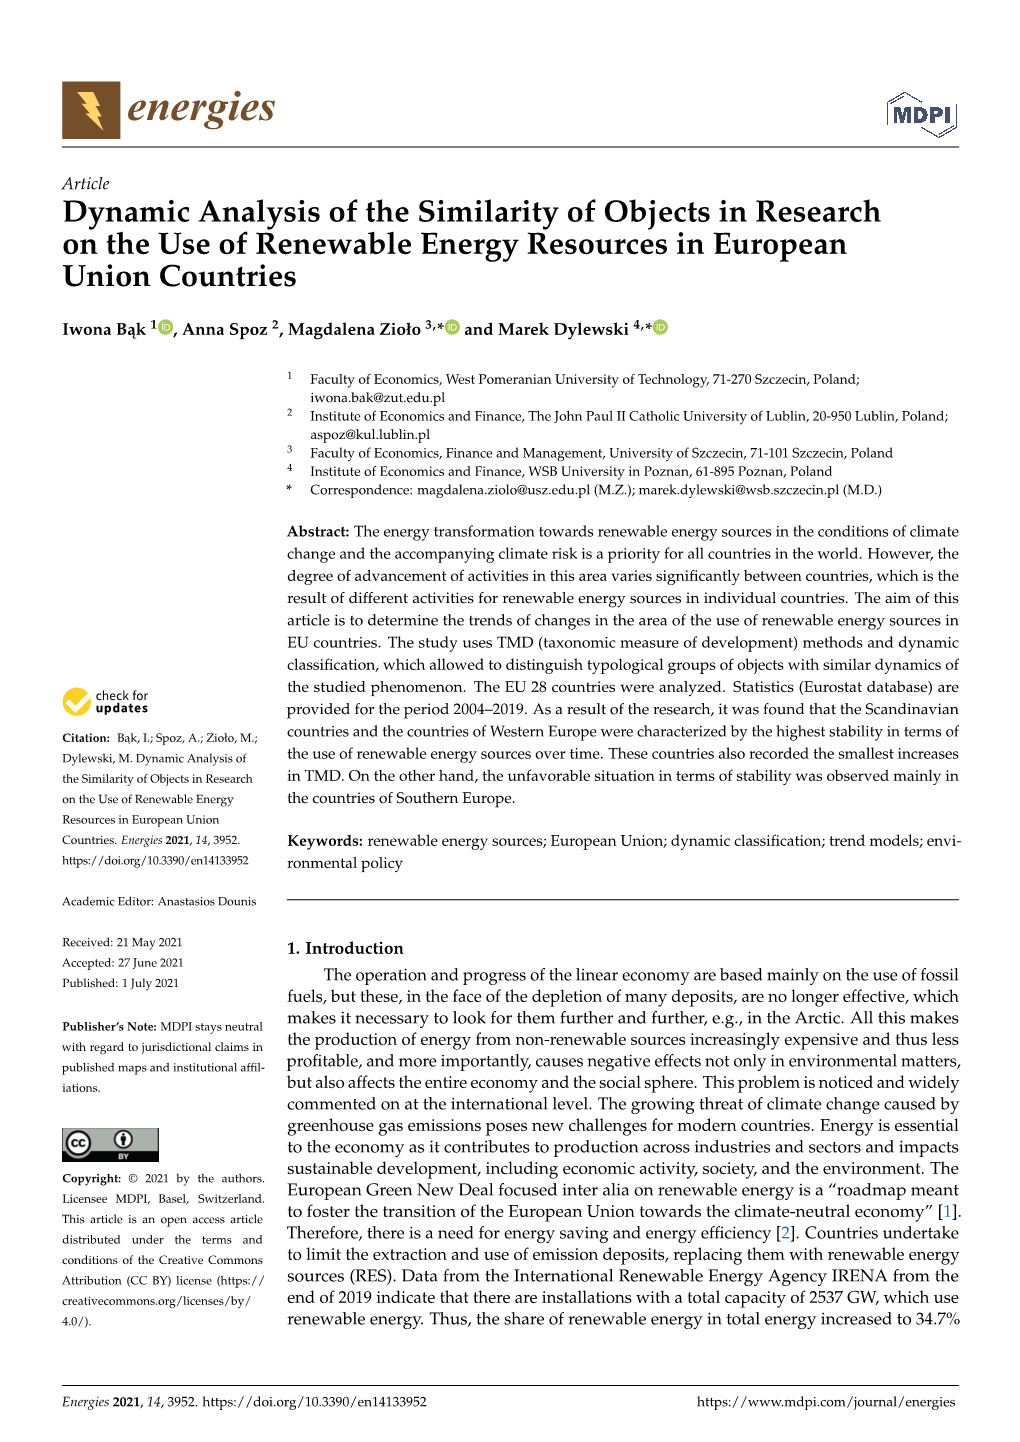 Dynamic Analysis of the Similarity of Objects in Research on the Use of Renewable Energy Resources in European Union Countries